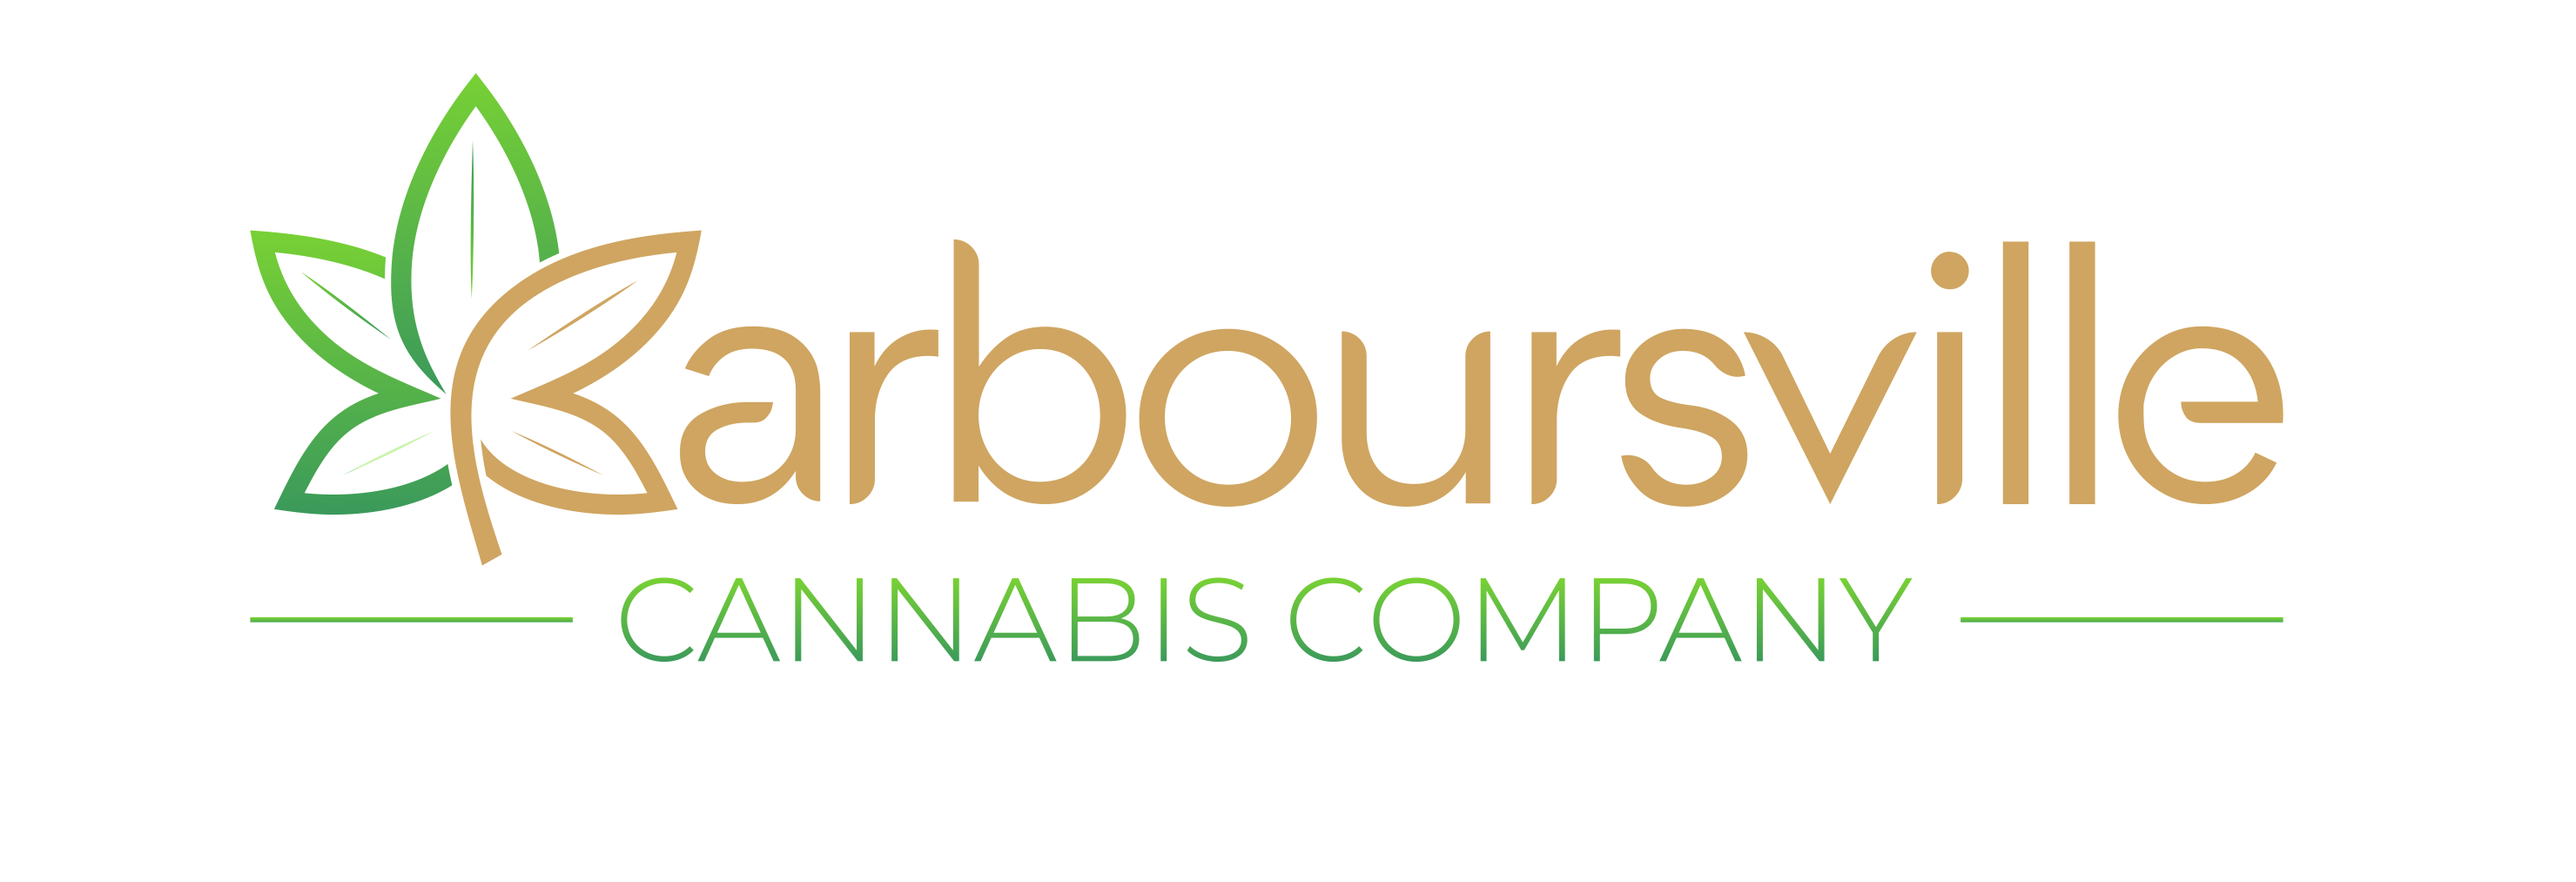 Welcome to Barboursville Cannabis Company